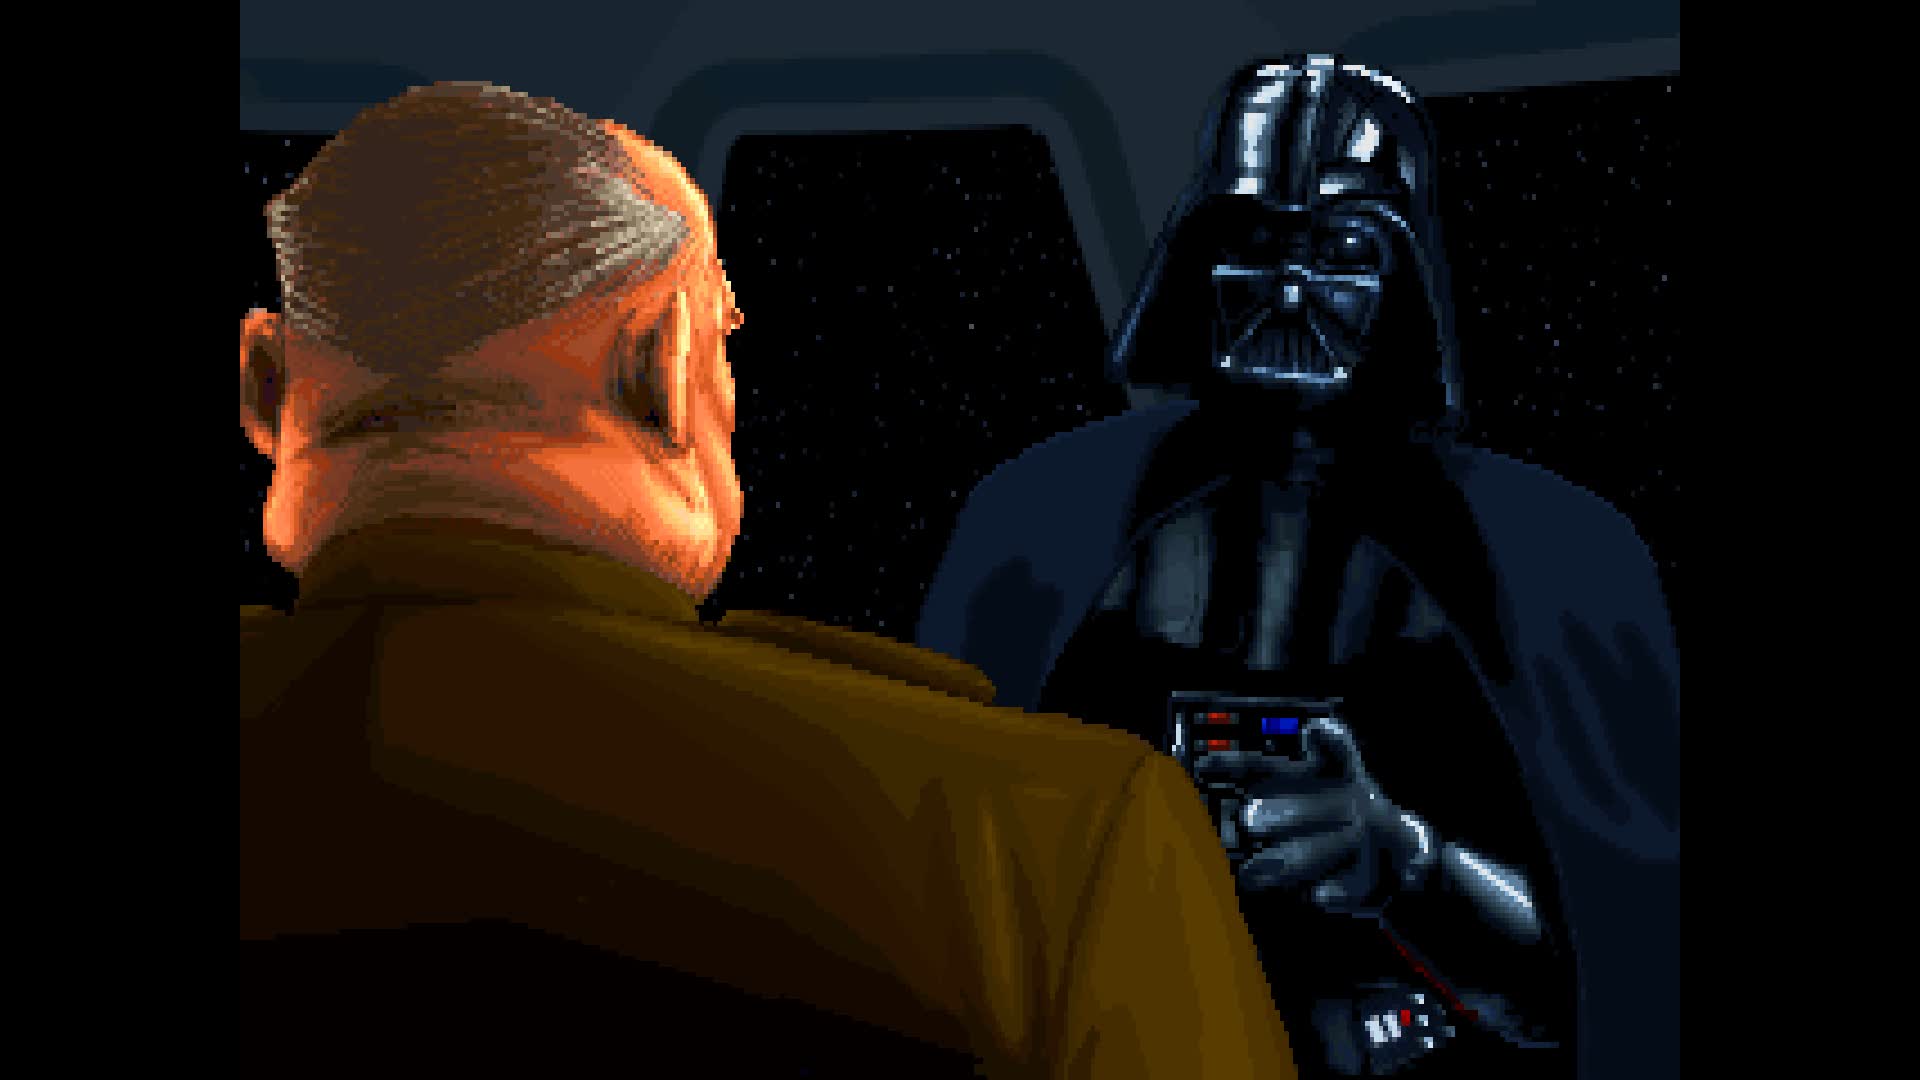 Star Wars: Dark Forces gets quality-of-life improvements thanks to reverse engineered game engine